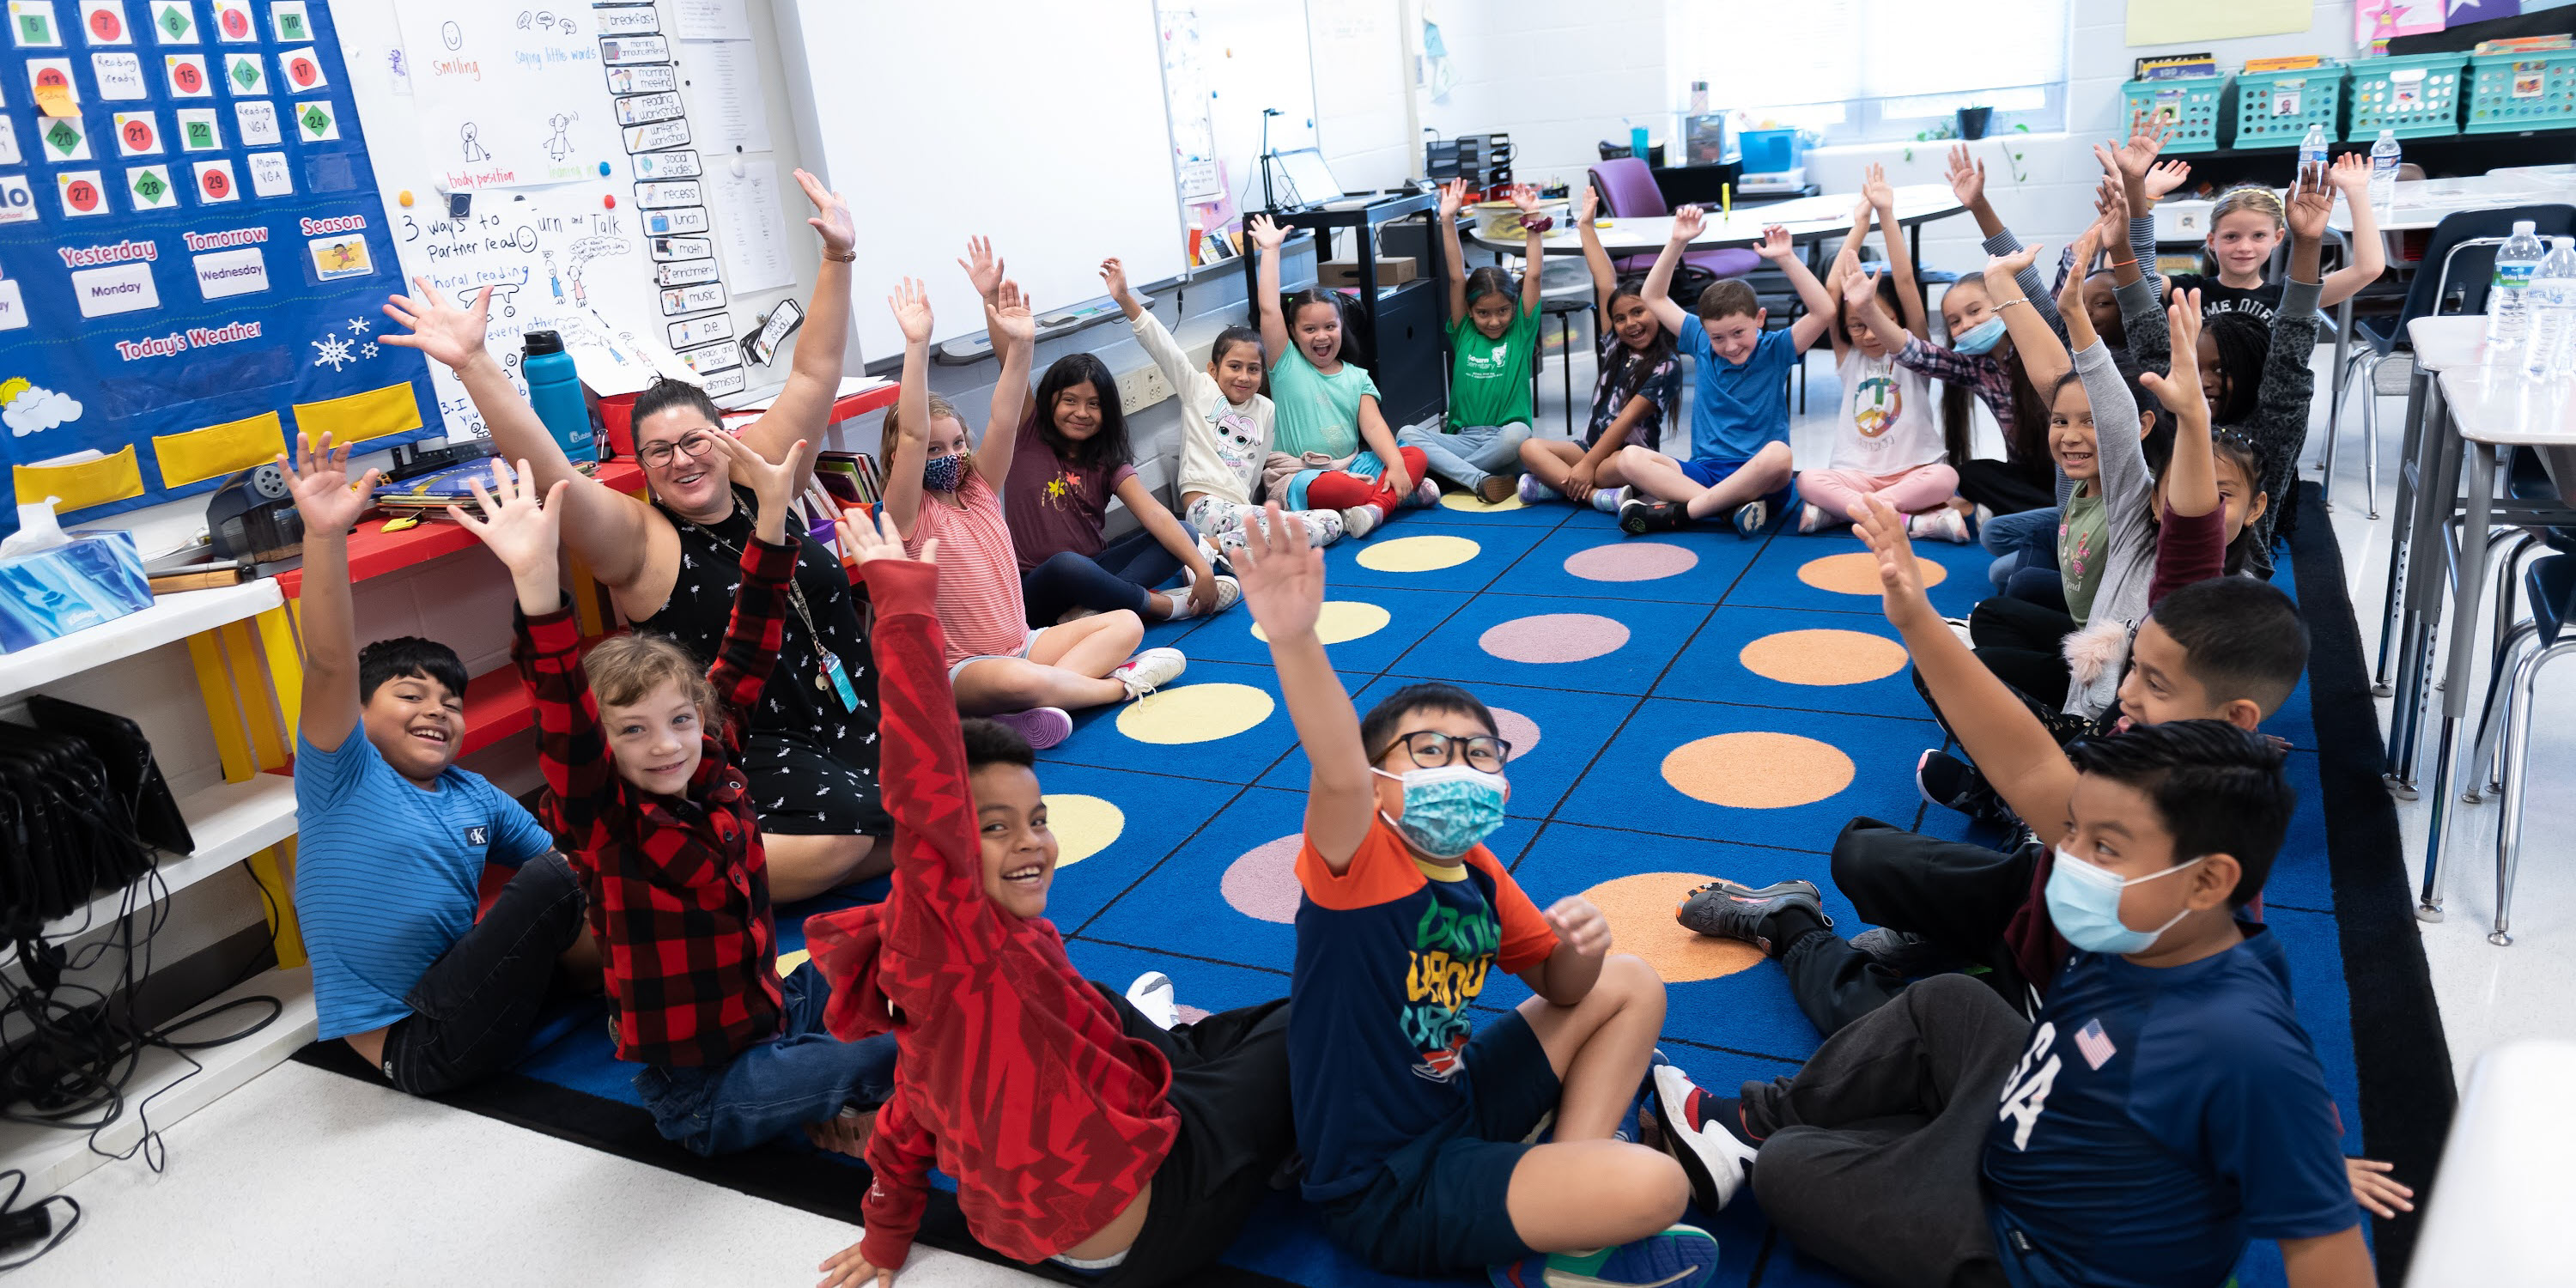 Students sitting on a classroom floor smiling with their hands up